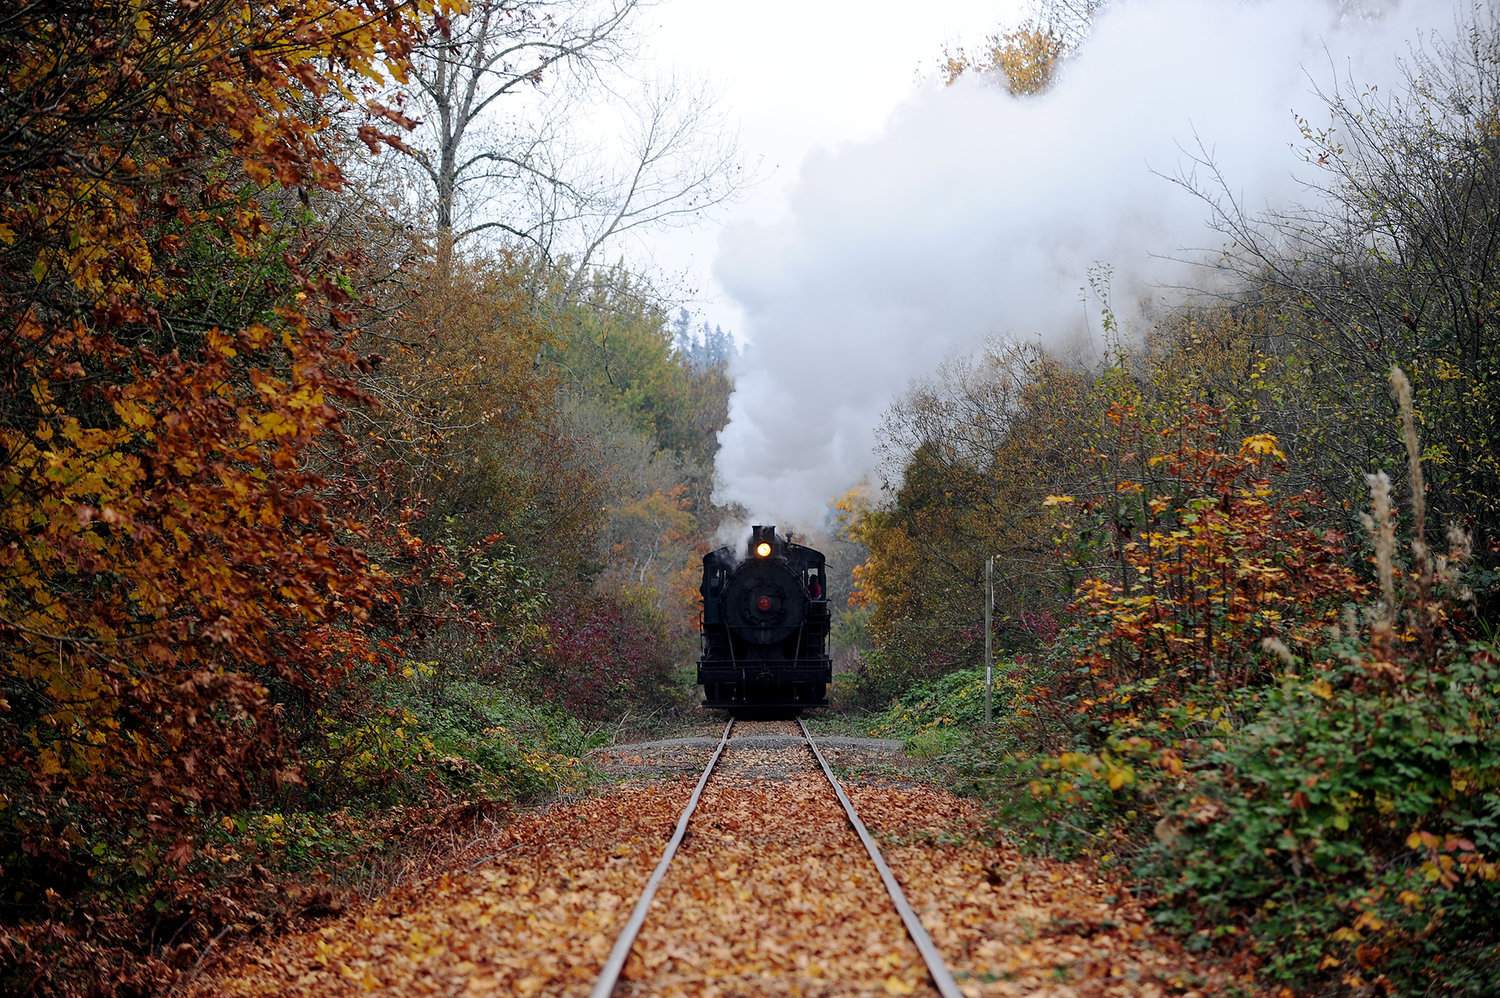 Chehalis Centralia Railroad To Hold Pumpkin Train Rides In October. The Daily Chronicle